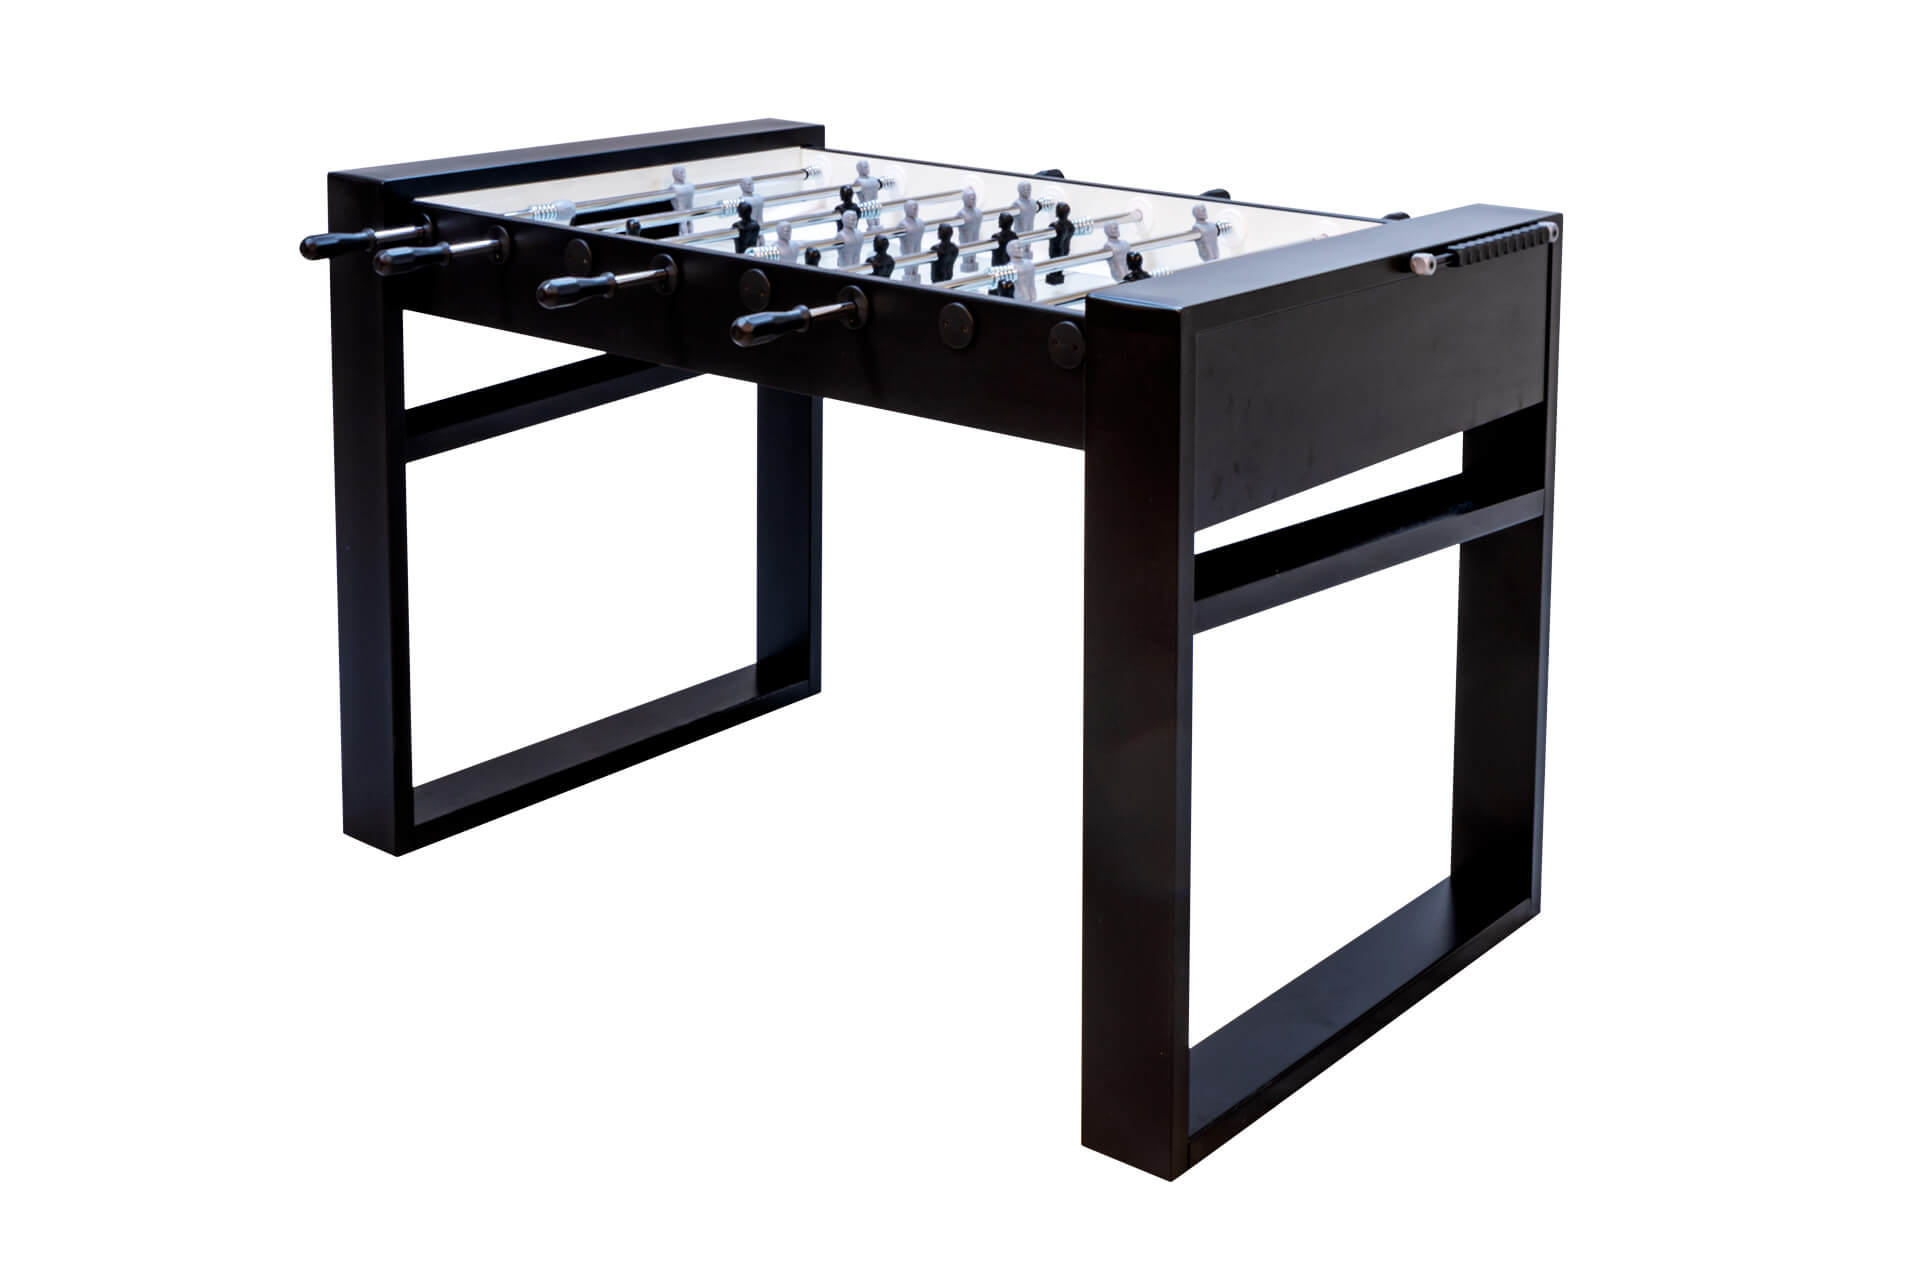 F.A.S. TOUR 65 FOOSBALL TABLE - BLACK